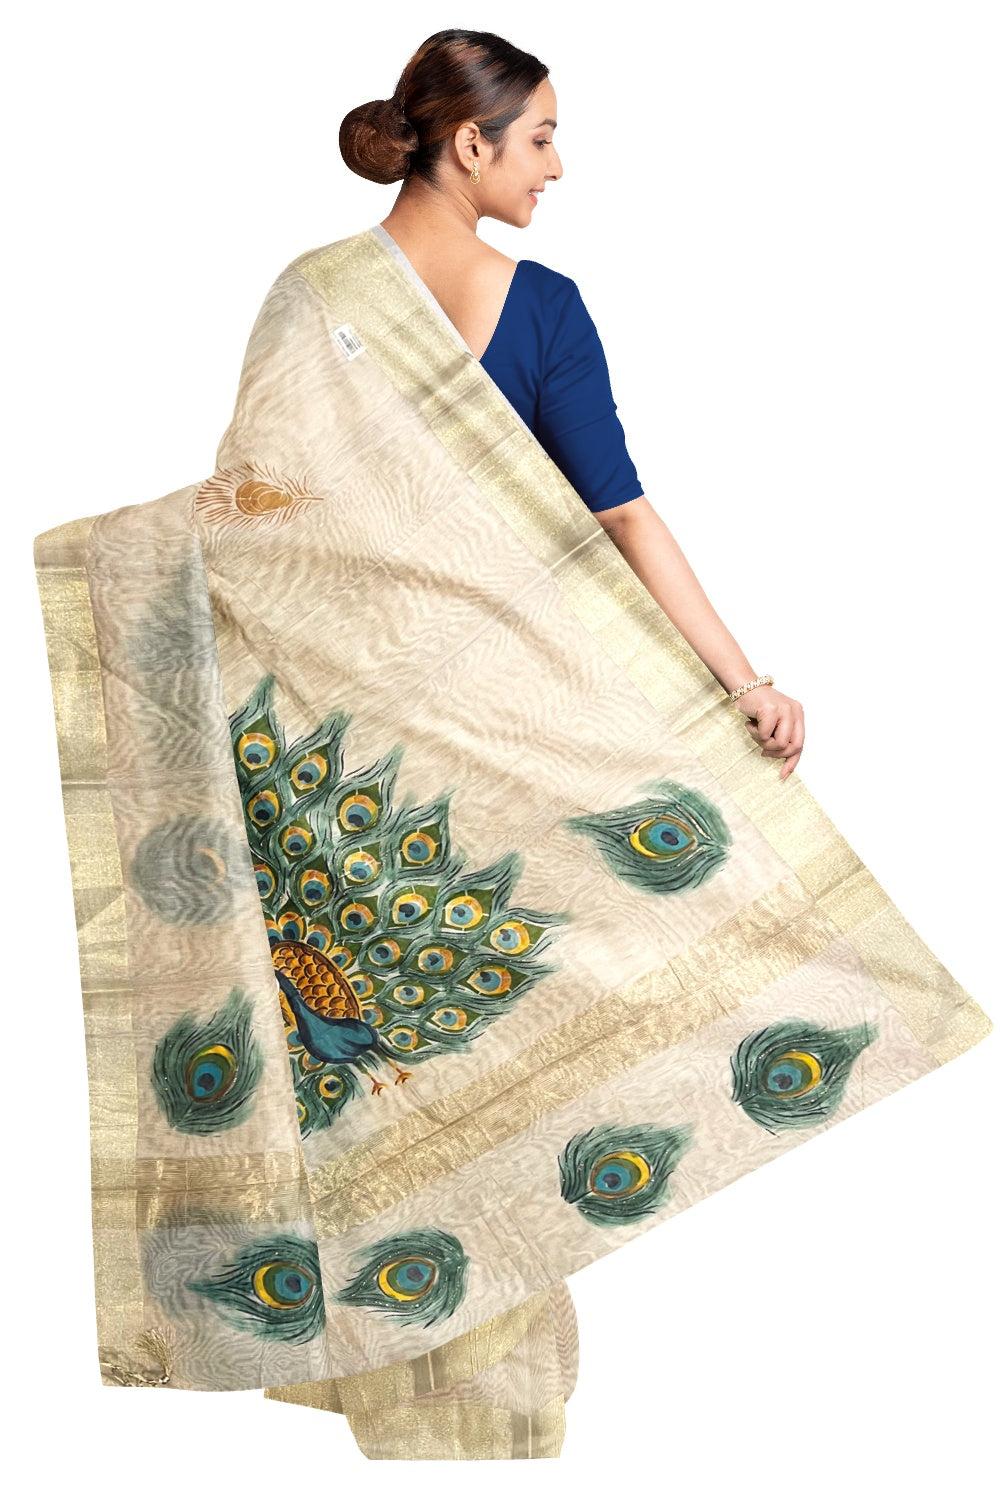 Southloom Light Brown Cotton Designer Saree with Mural Painted Work